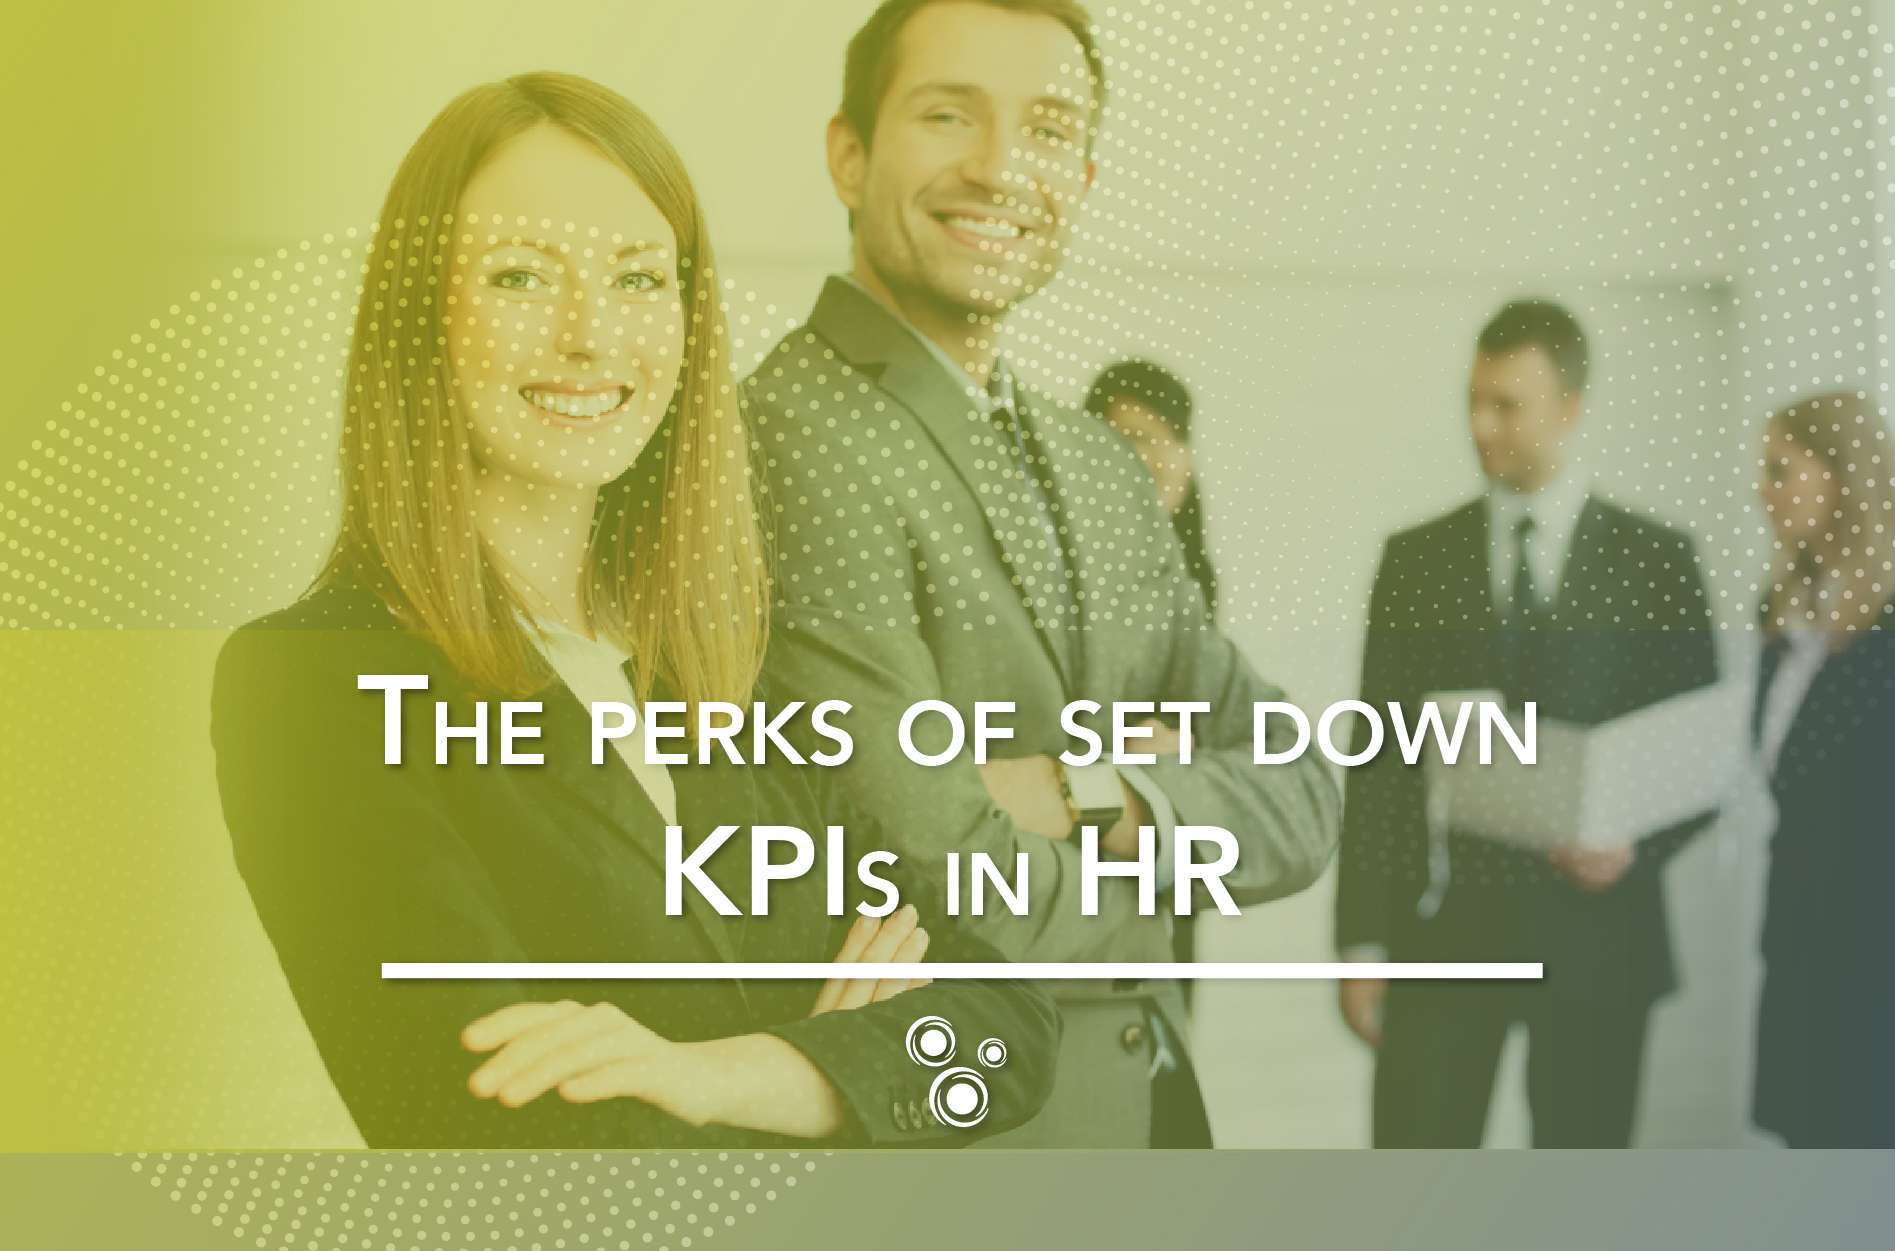 The perks of set down KPIs in HR